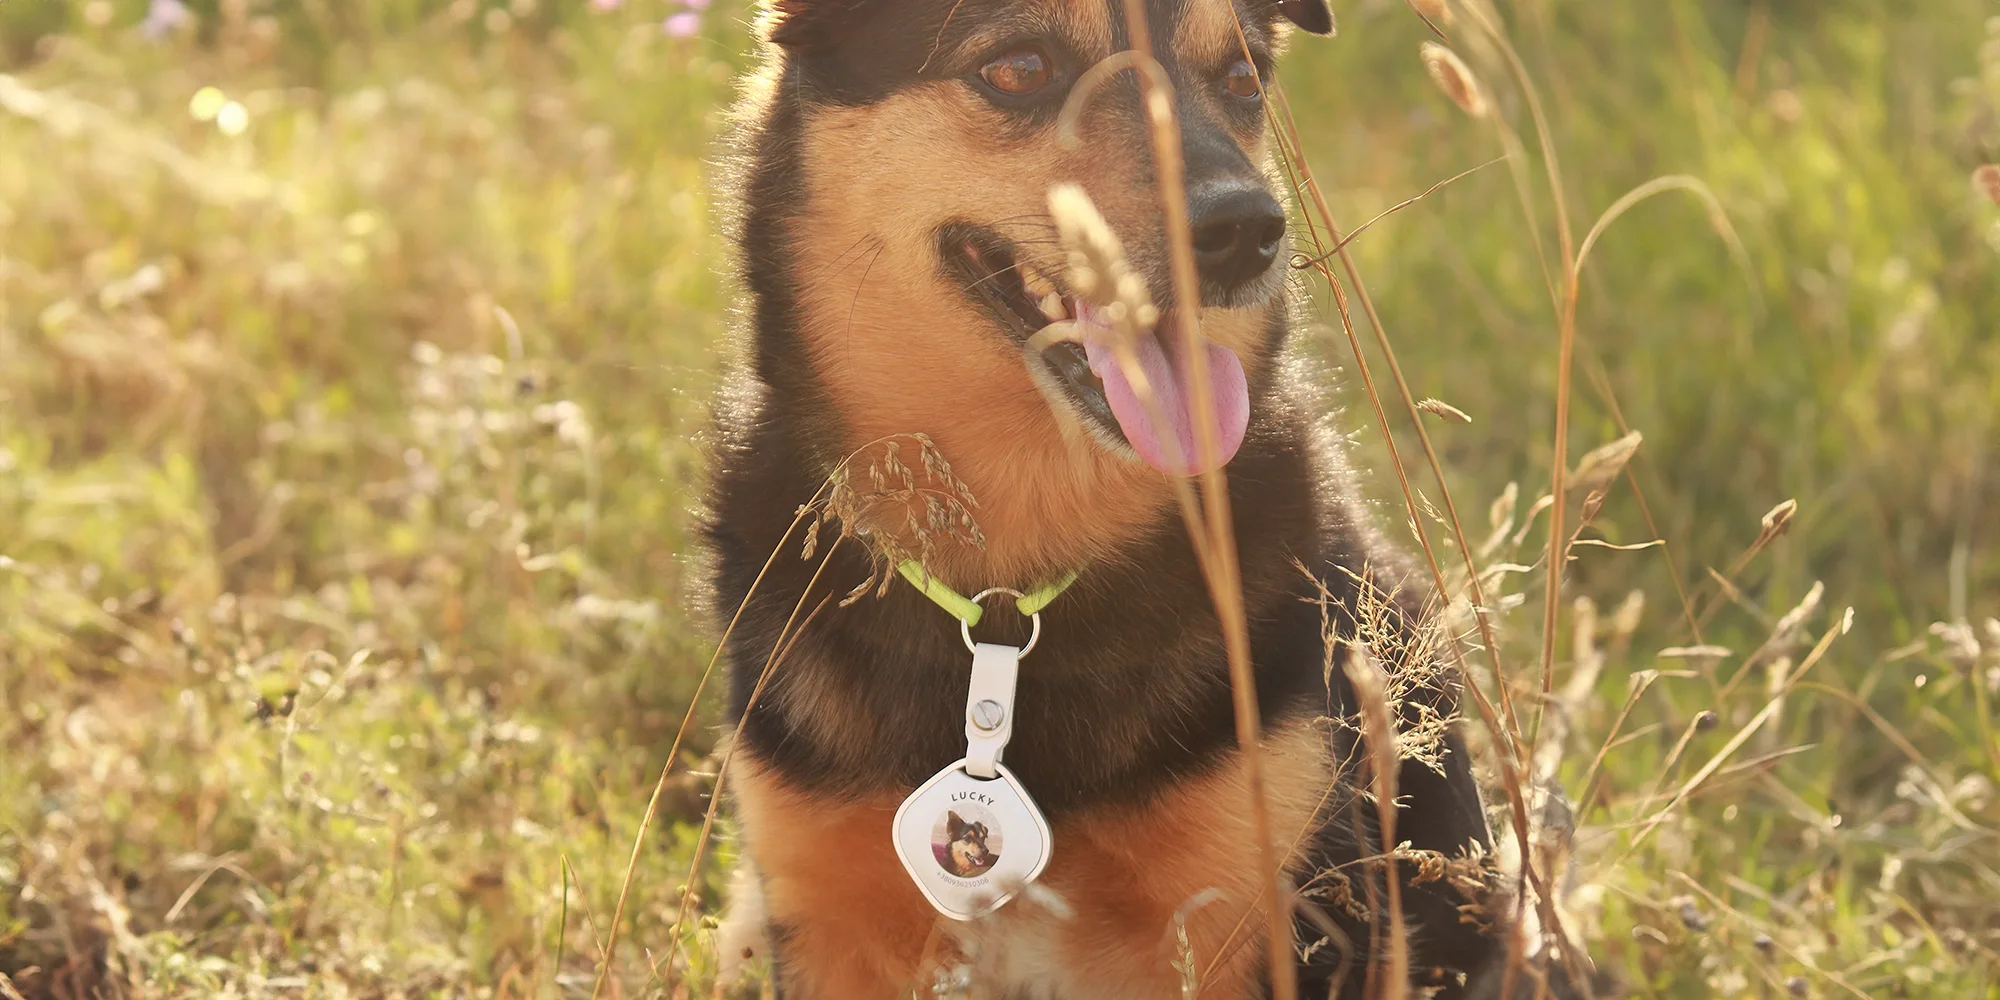 Sleepets Dog Tag Review: Pet Tracker with Apple FindMy Support